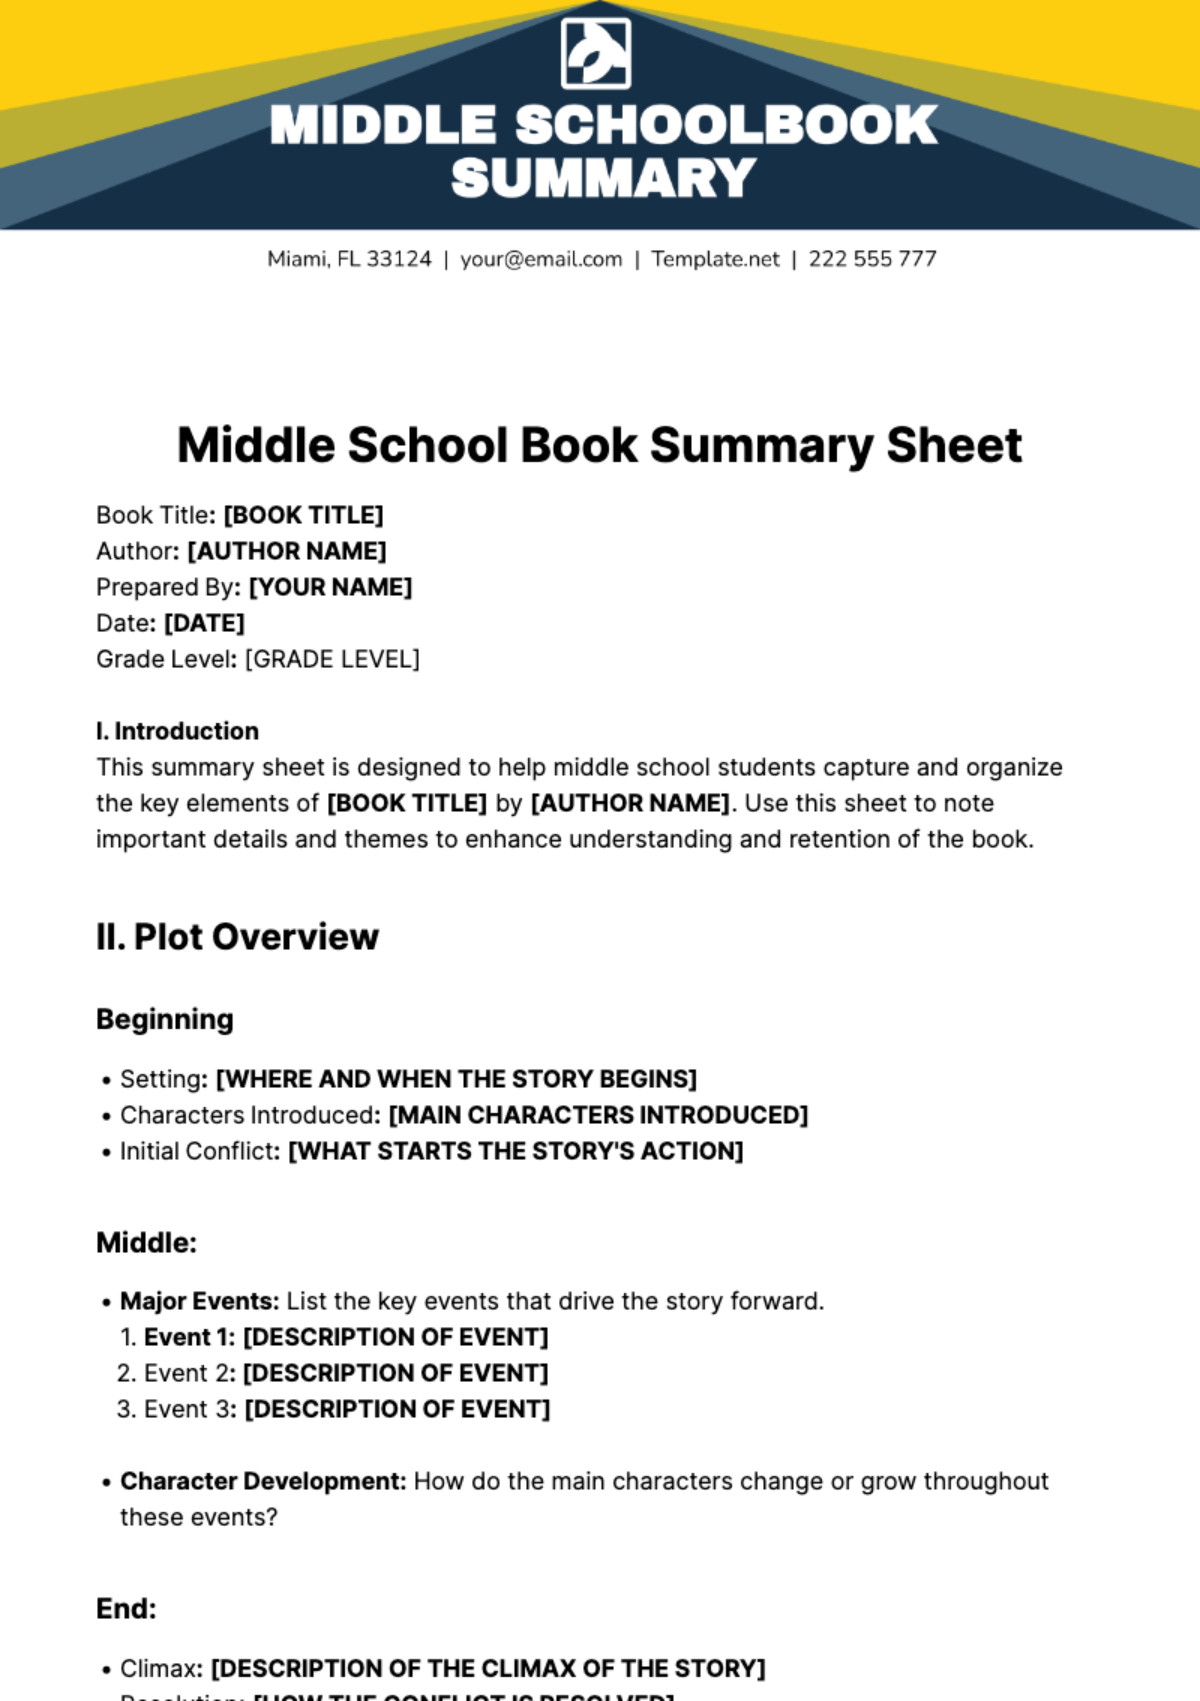 Middle School Book Summary Sheet Template